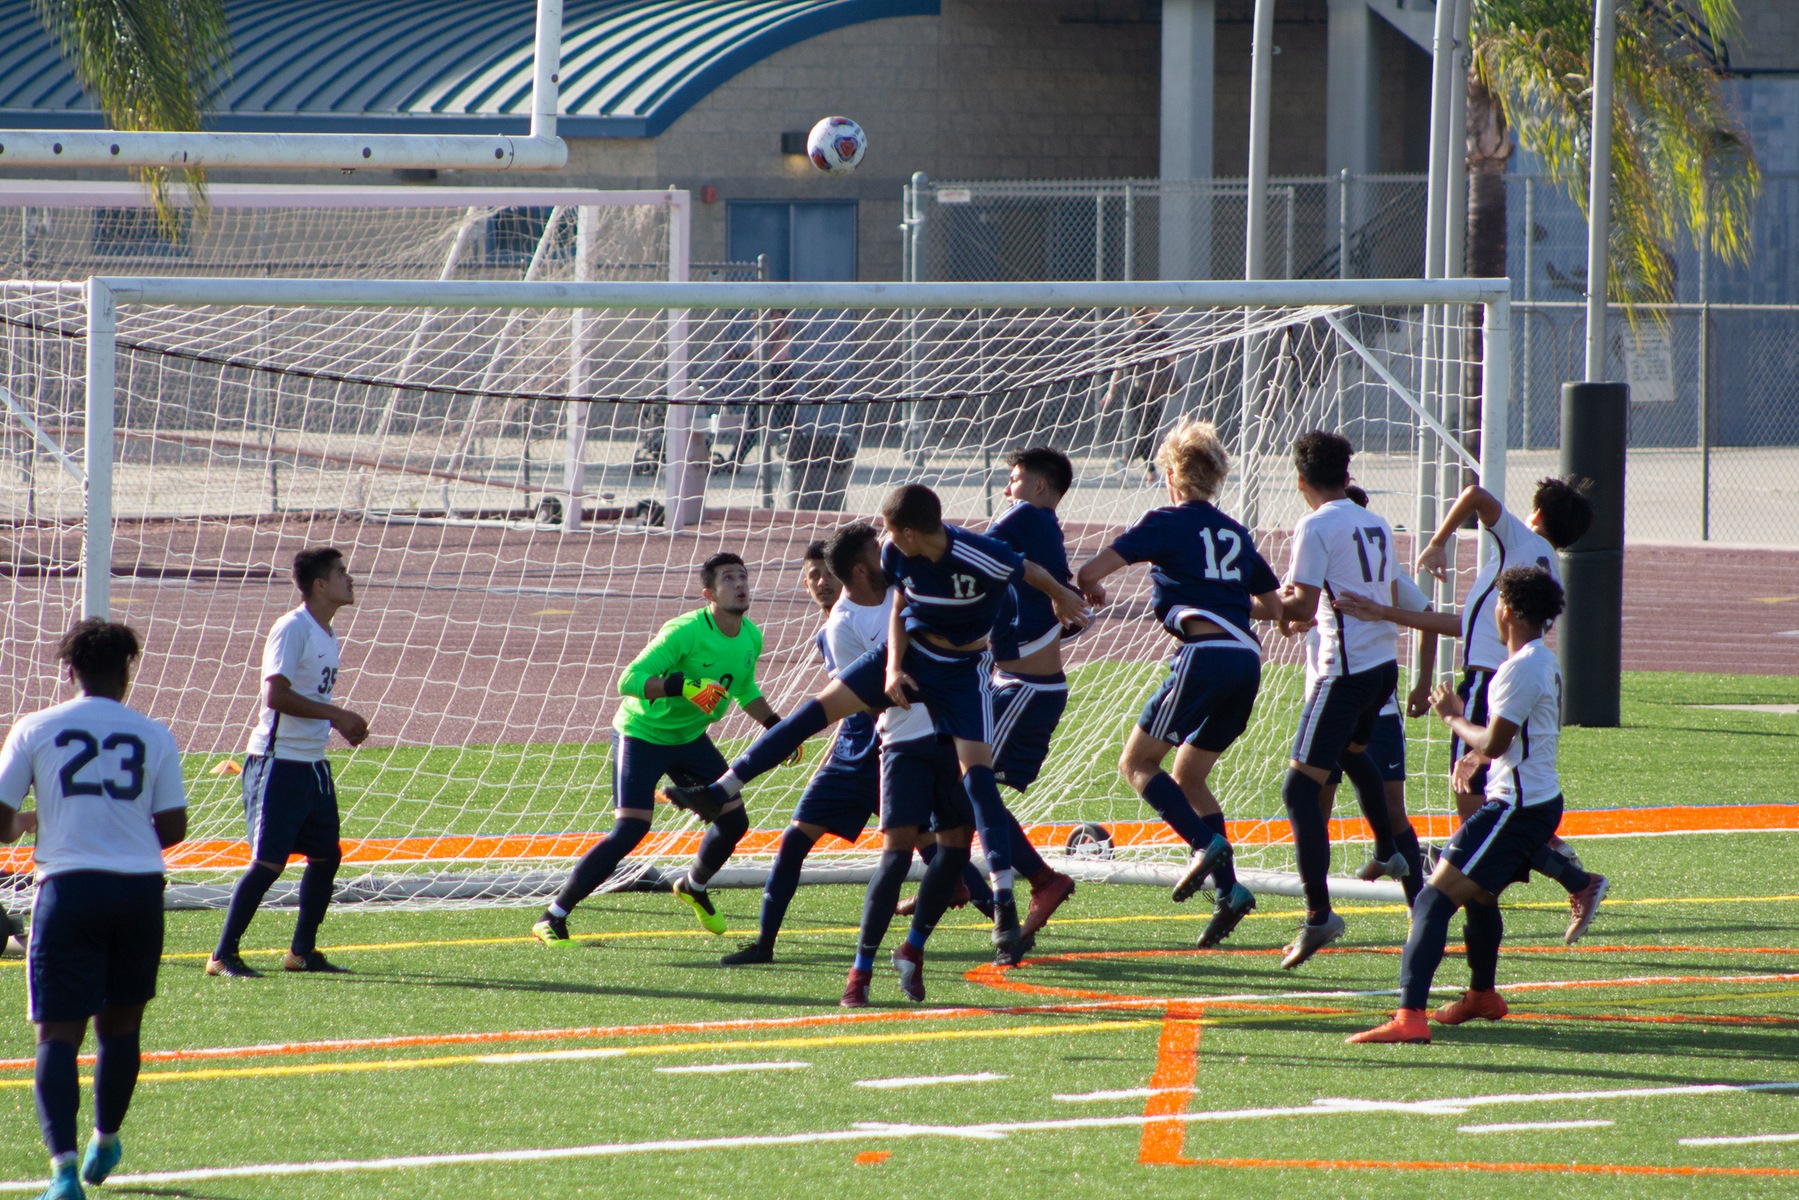 Citrus attackers go airborne on a corner kick. The athletic header missed high.